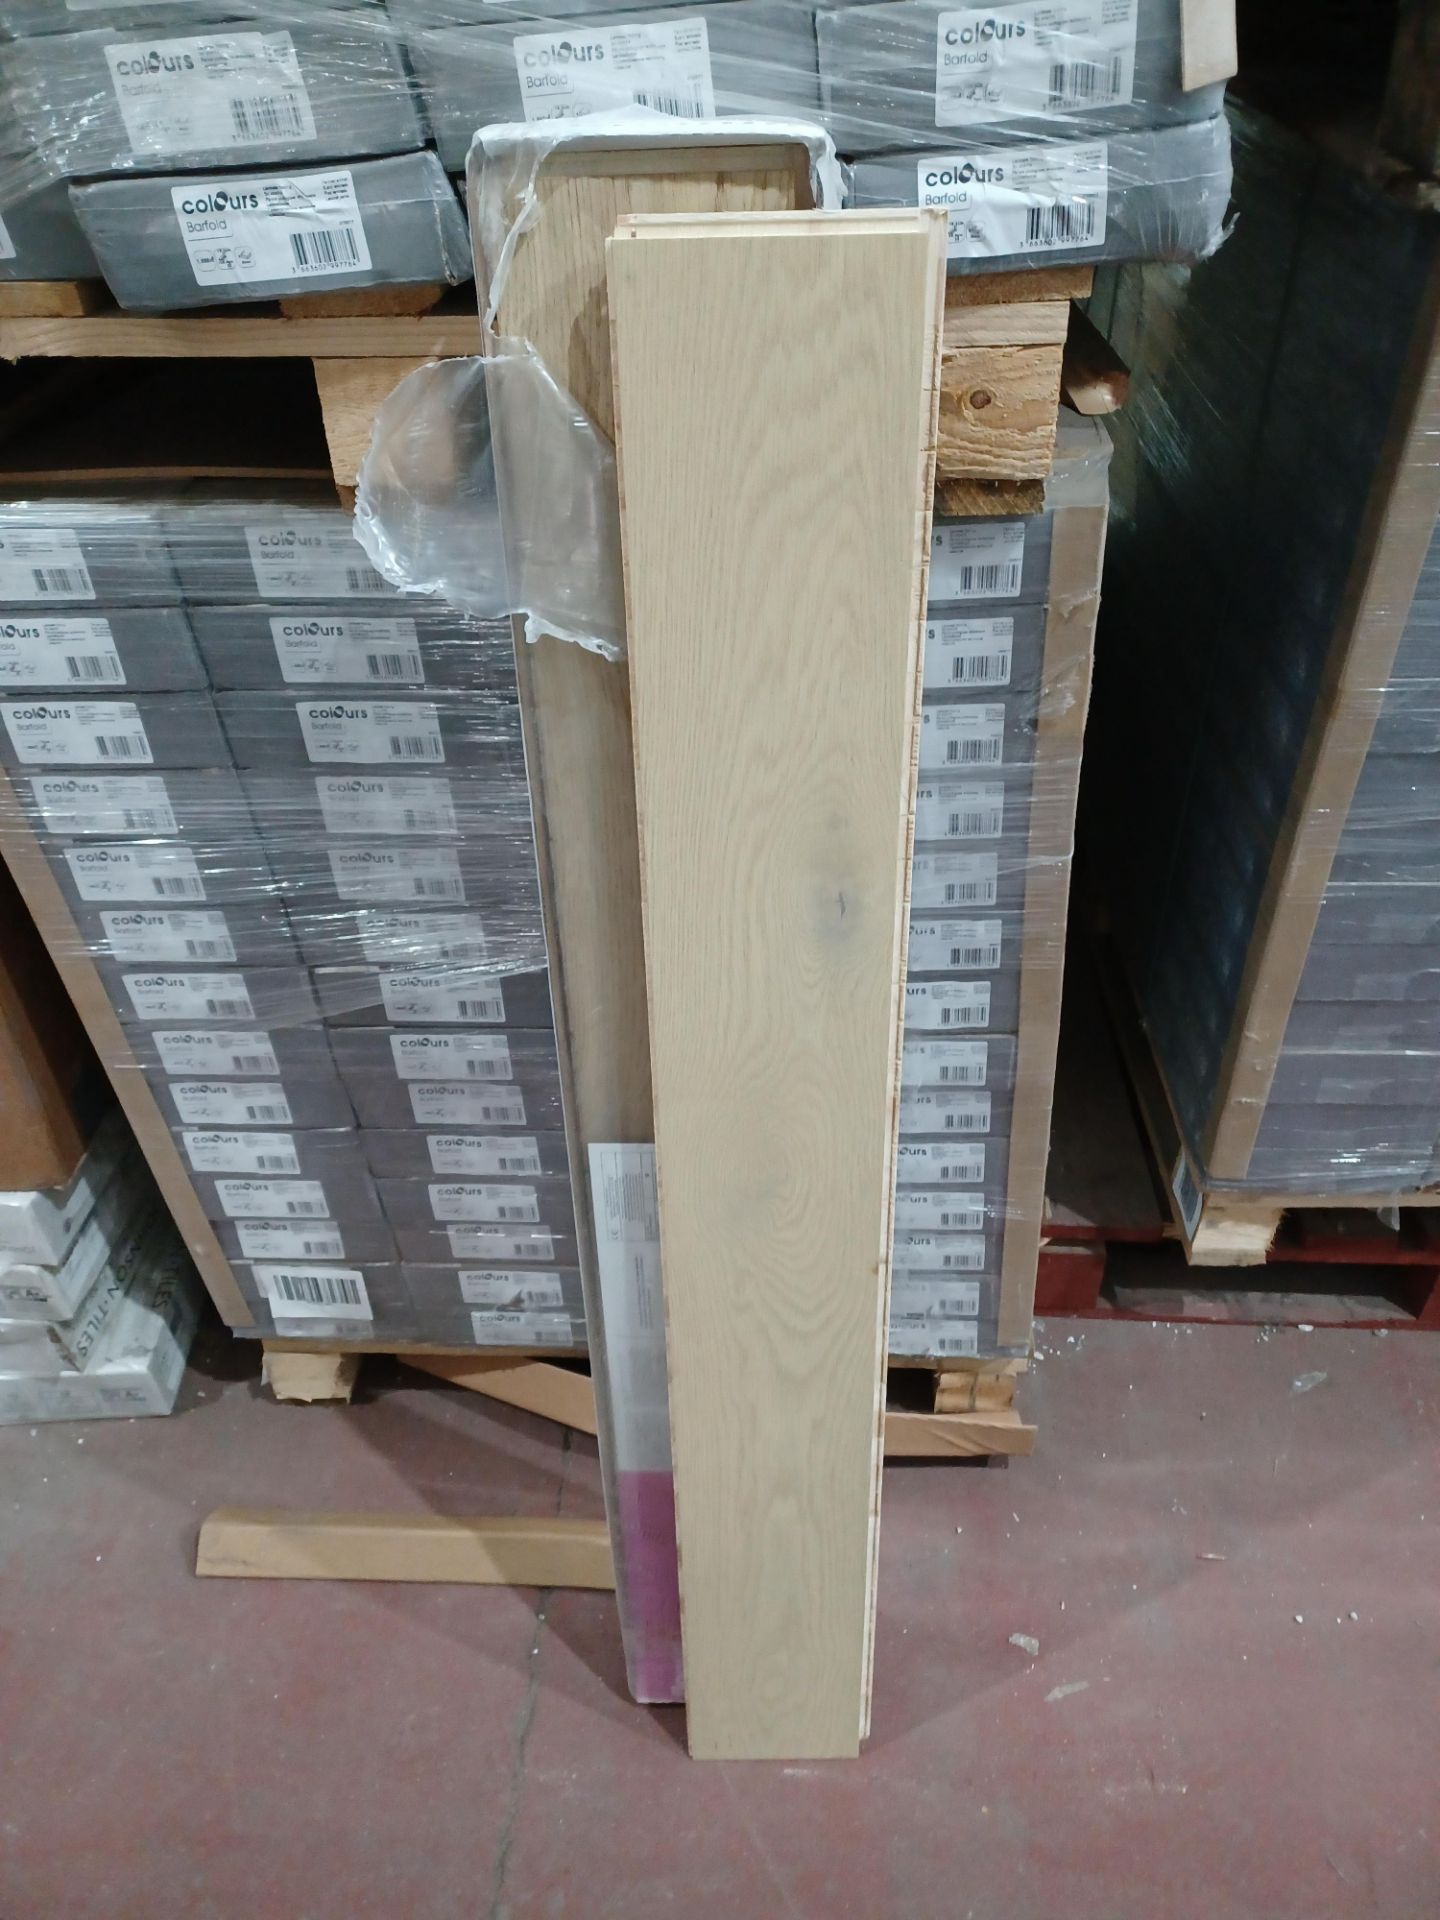 5 x Packs of Isaberg Natural Oak Real wood top layer flooring. Each pack contains 1.84m2, giving